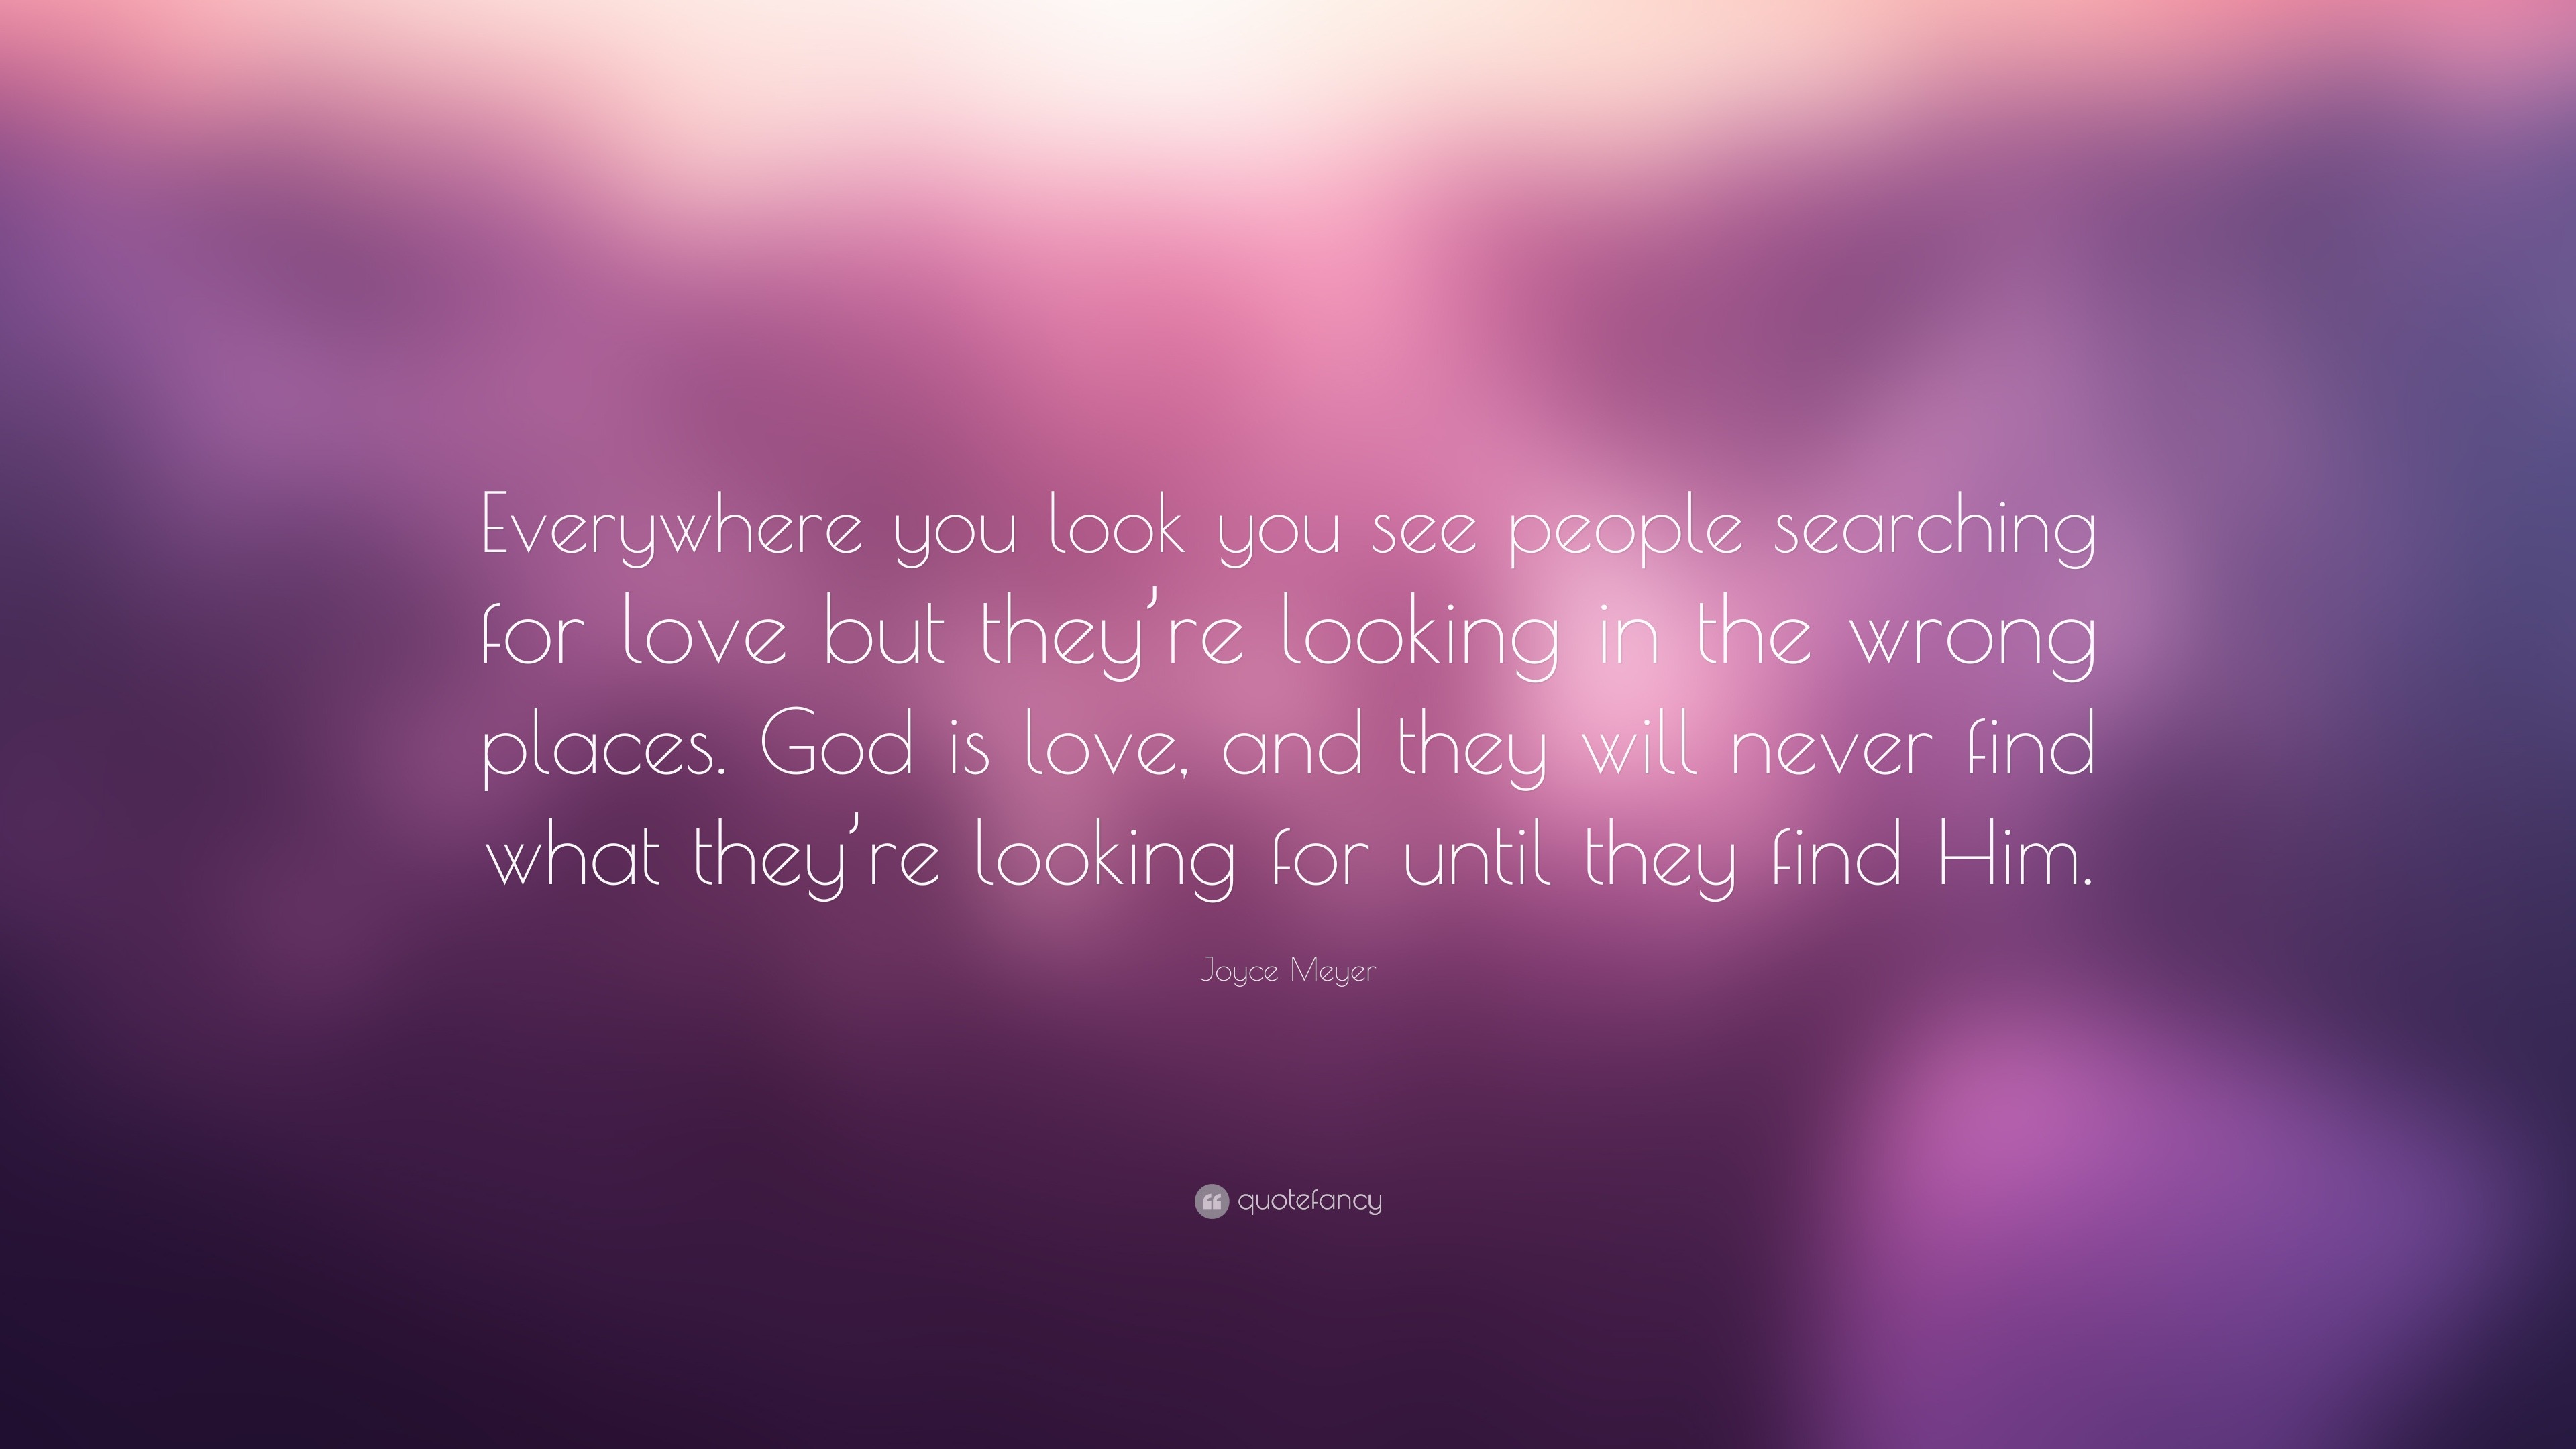 Joyce Meyer Quote “Everywhere you look you see people searching for love but they